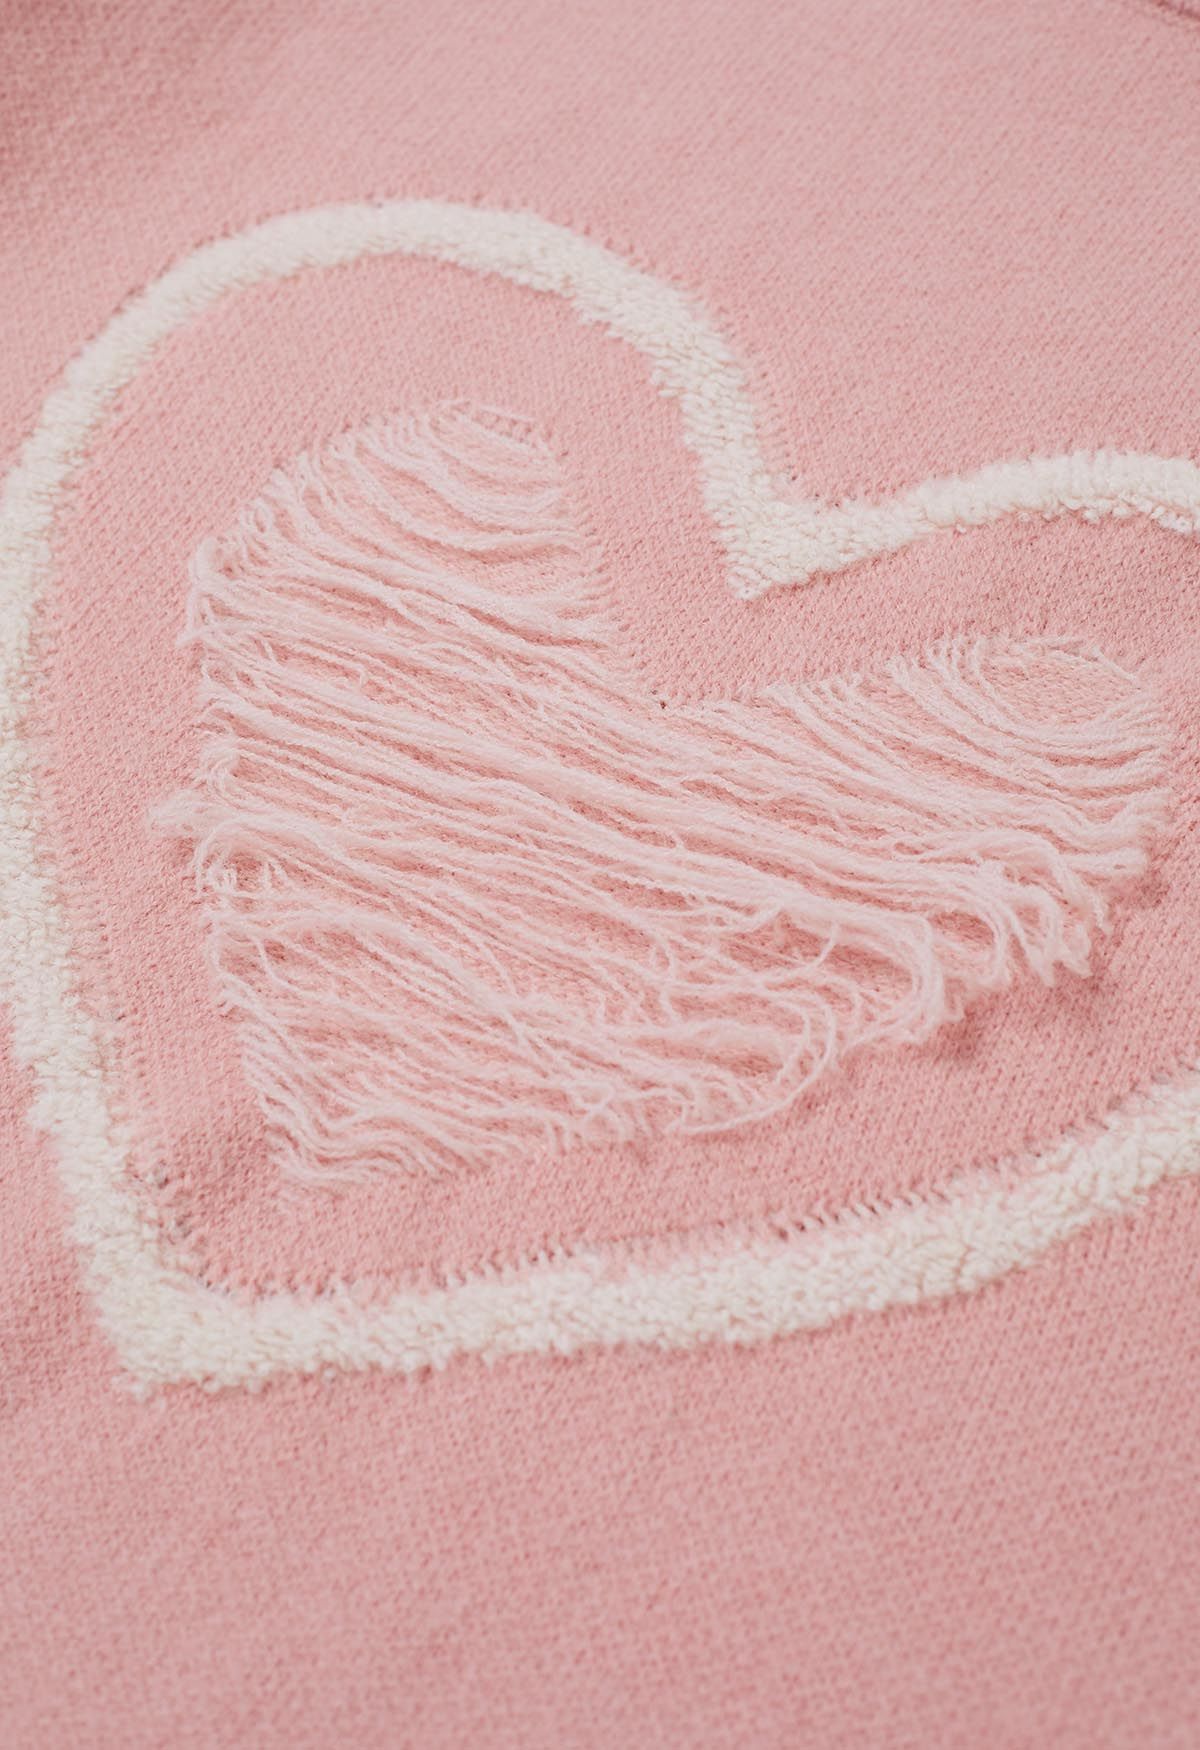 Ripped Heart Snug Knit Sweater in Pink